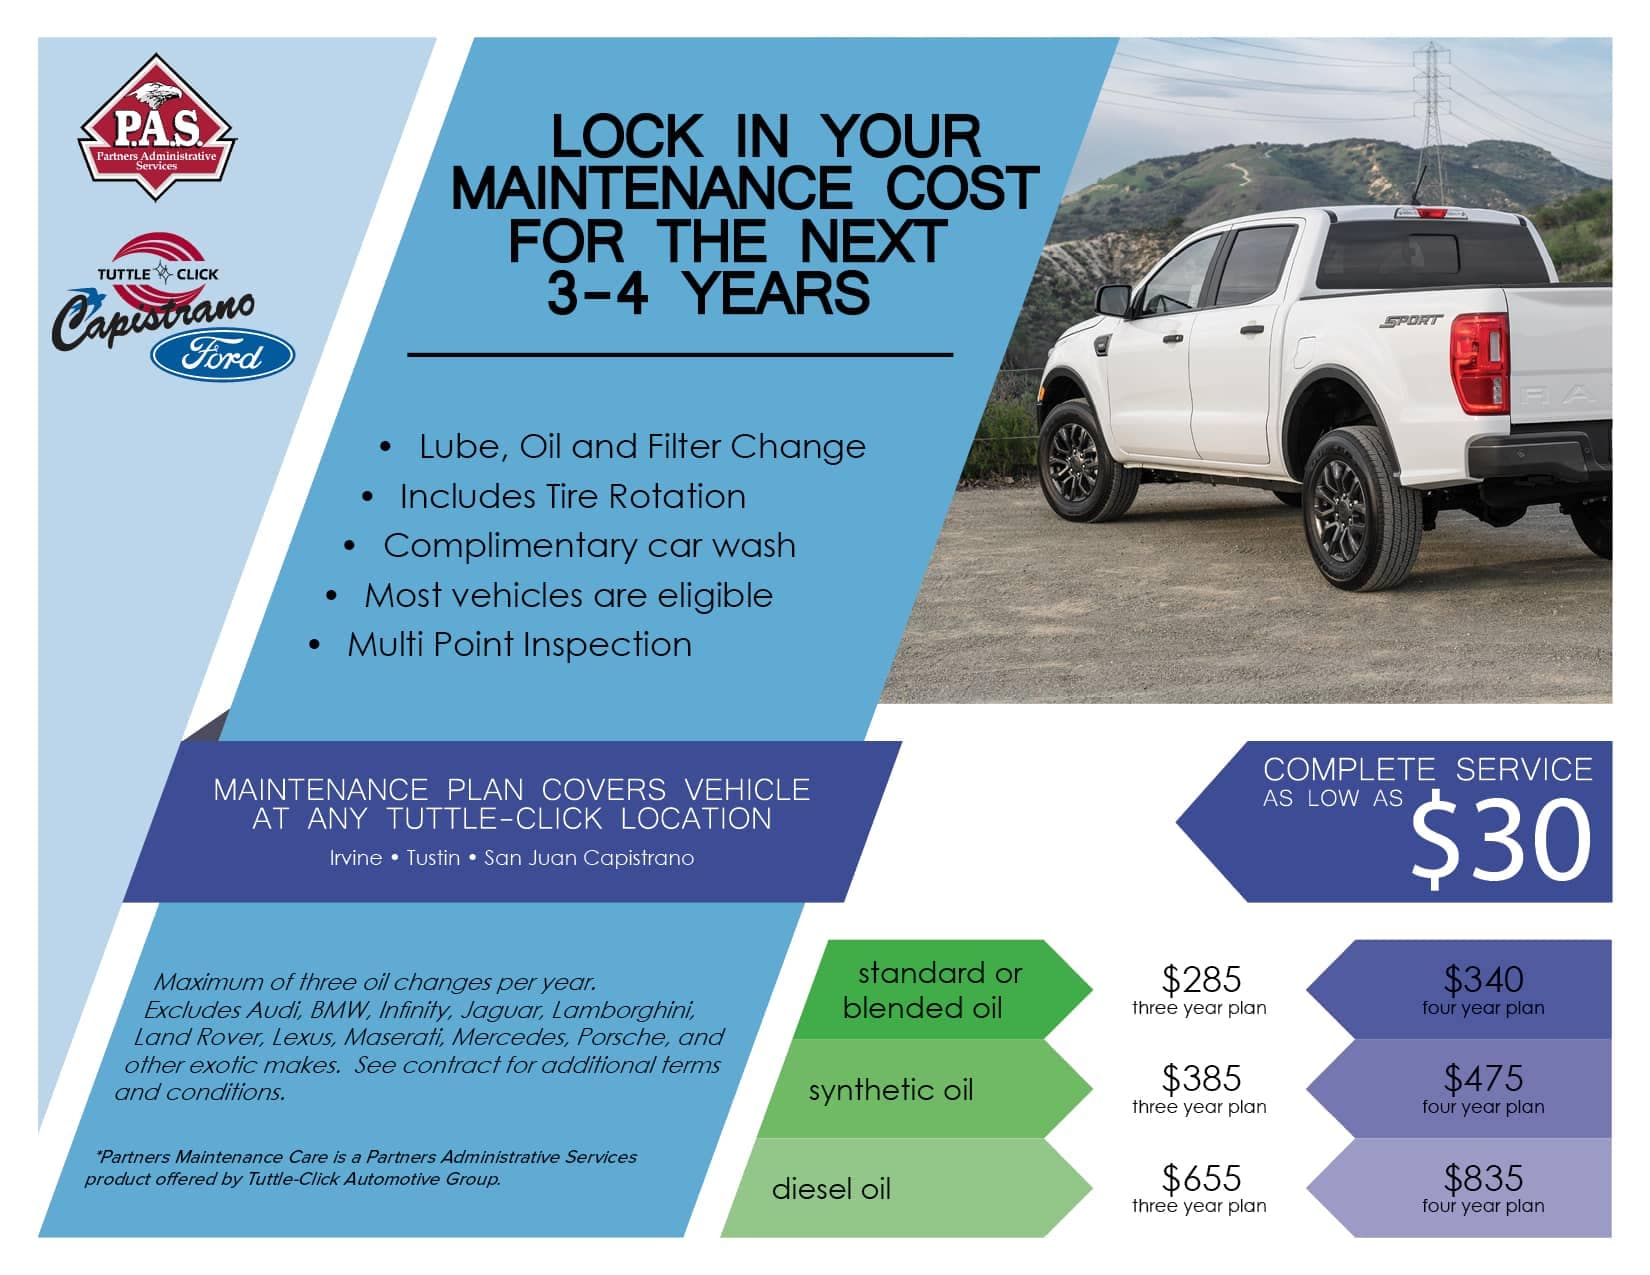 Capistrano Ford - Partners Maintenance Care - Lock in your maintenance cost for the next 3-4 years